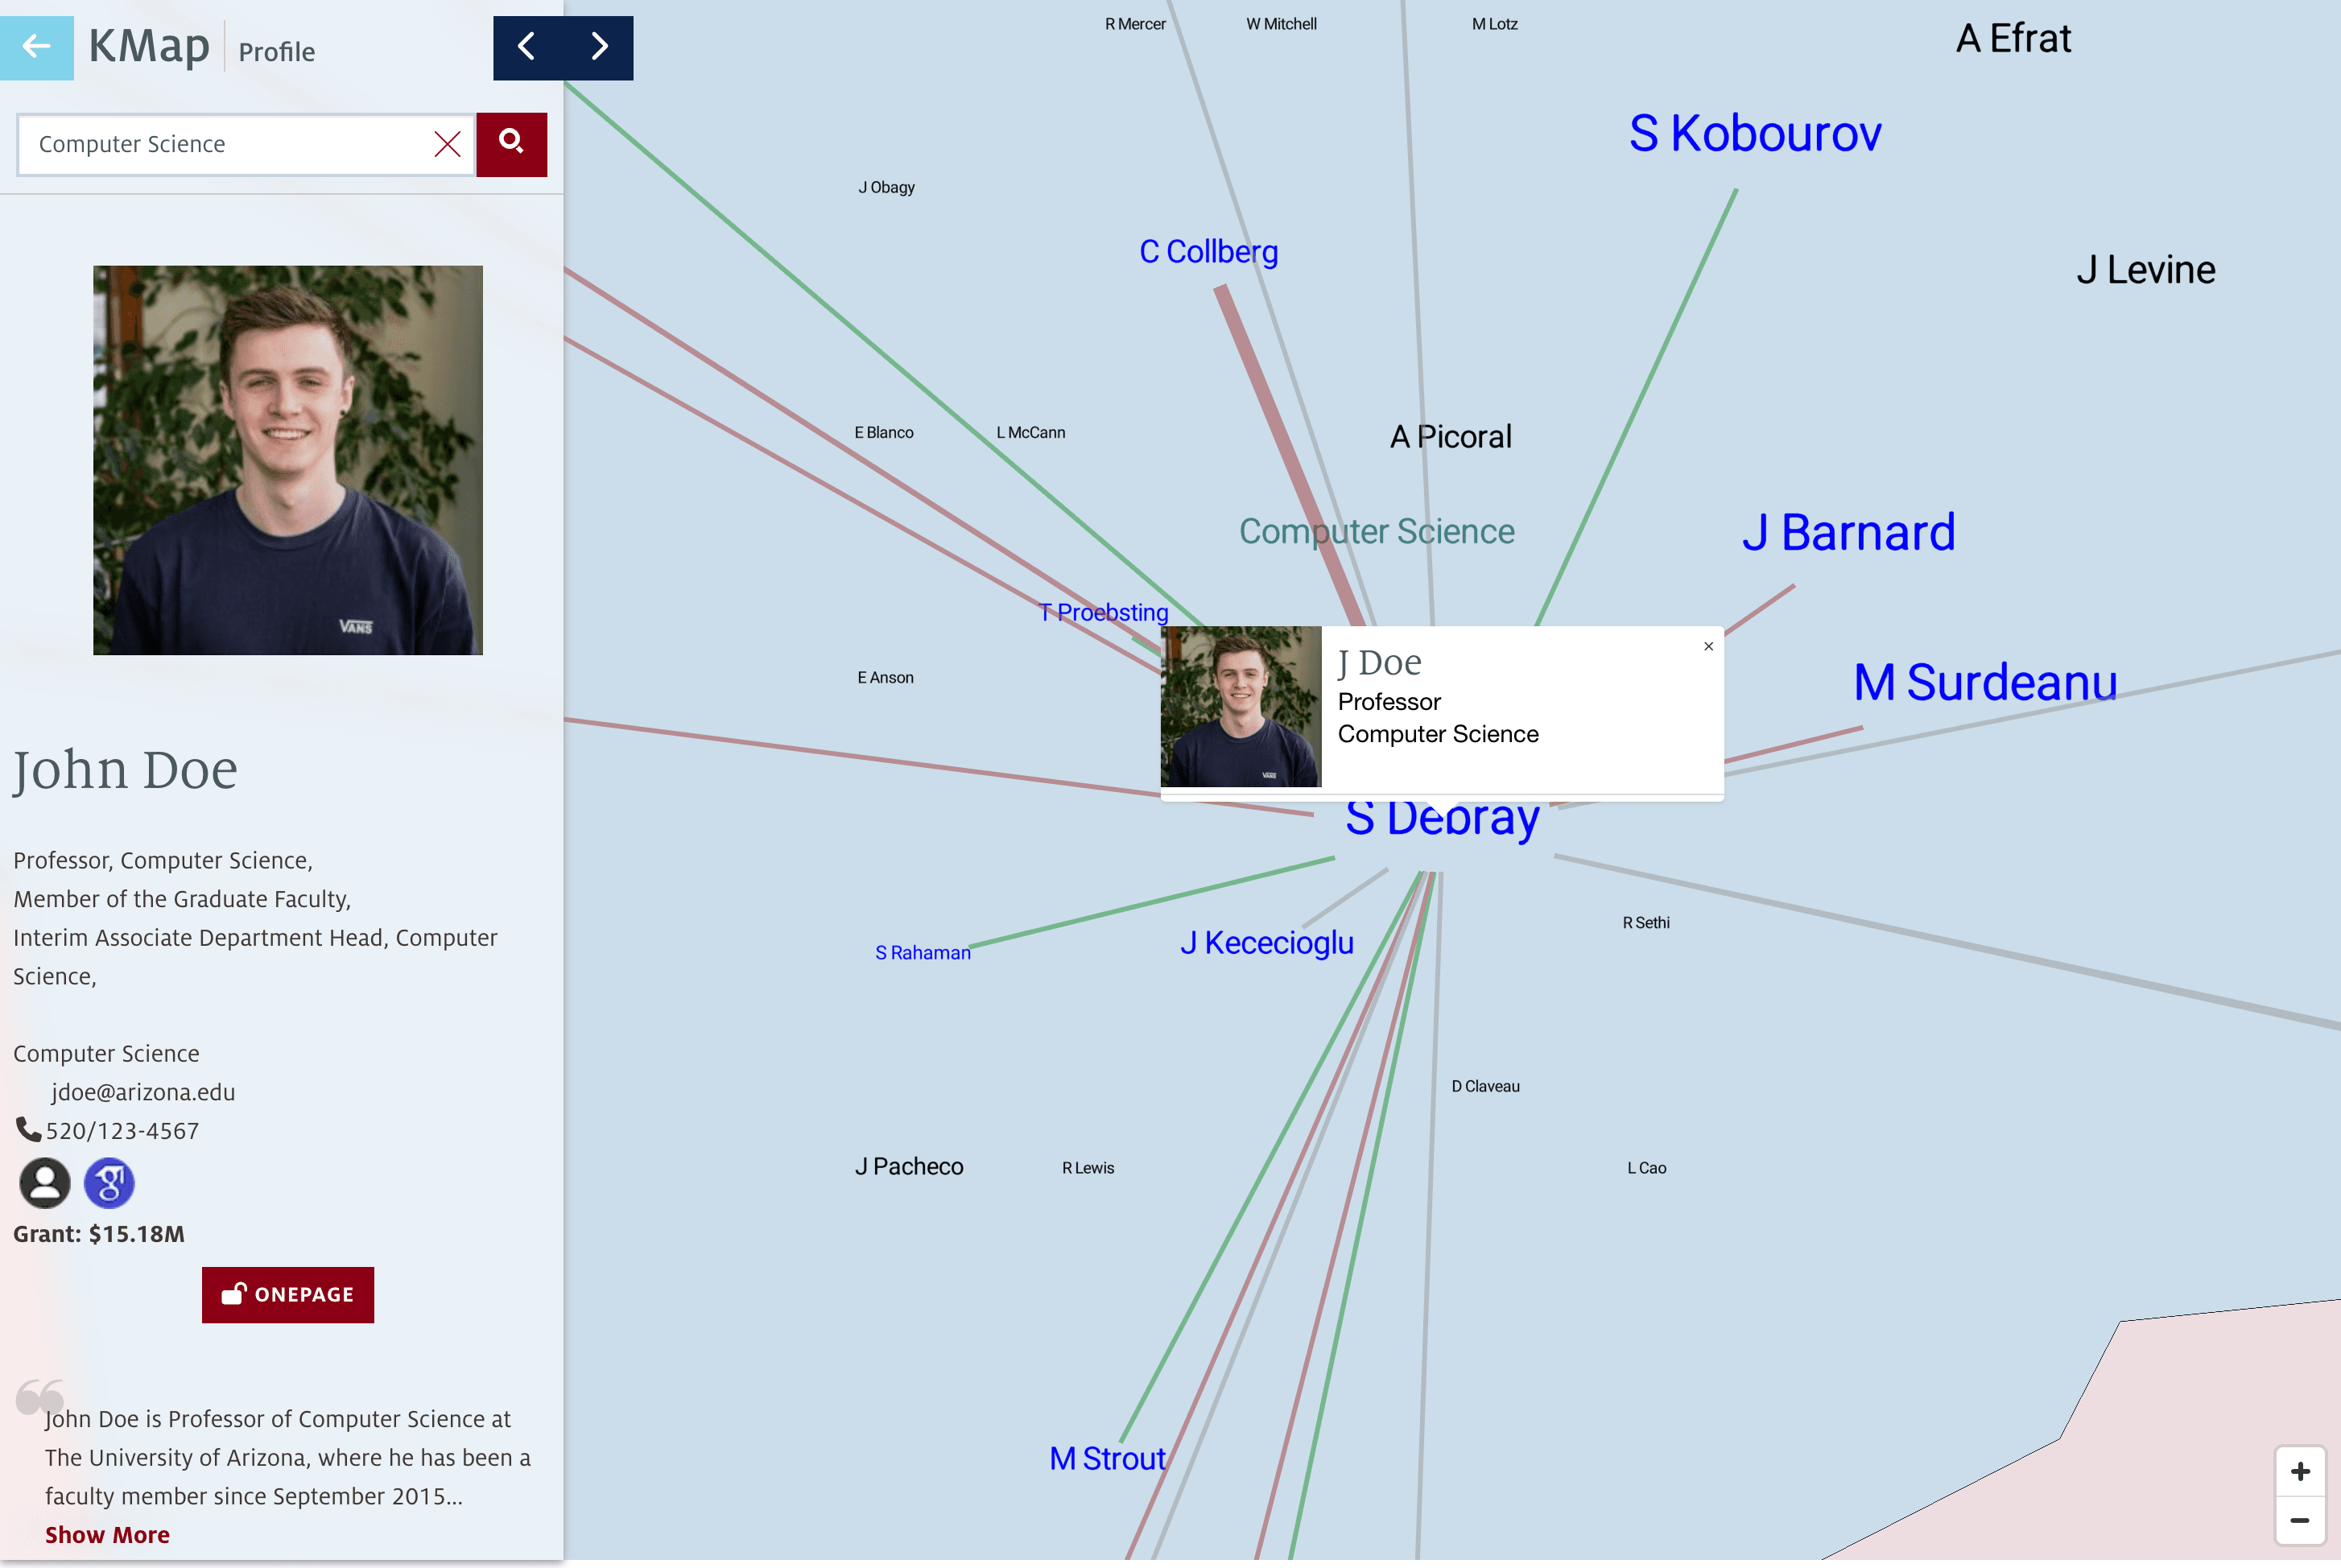 A screenshot with map and sidebar showing researcher summary